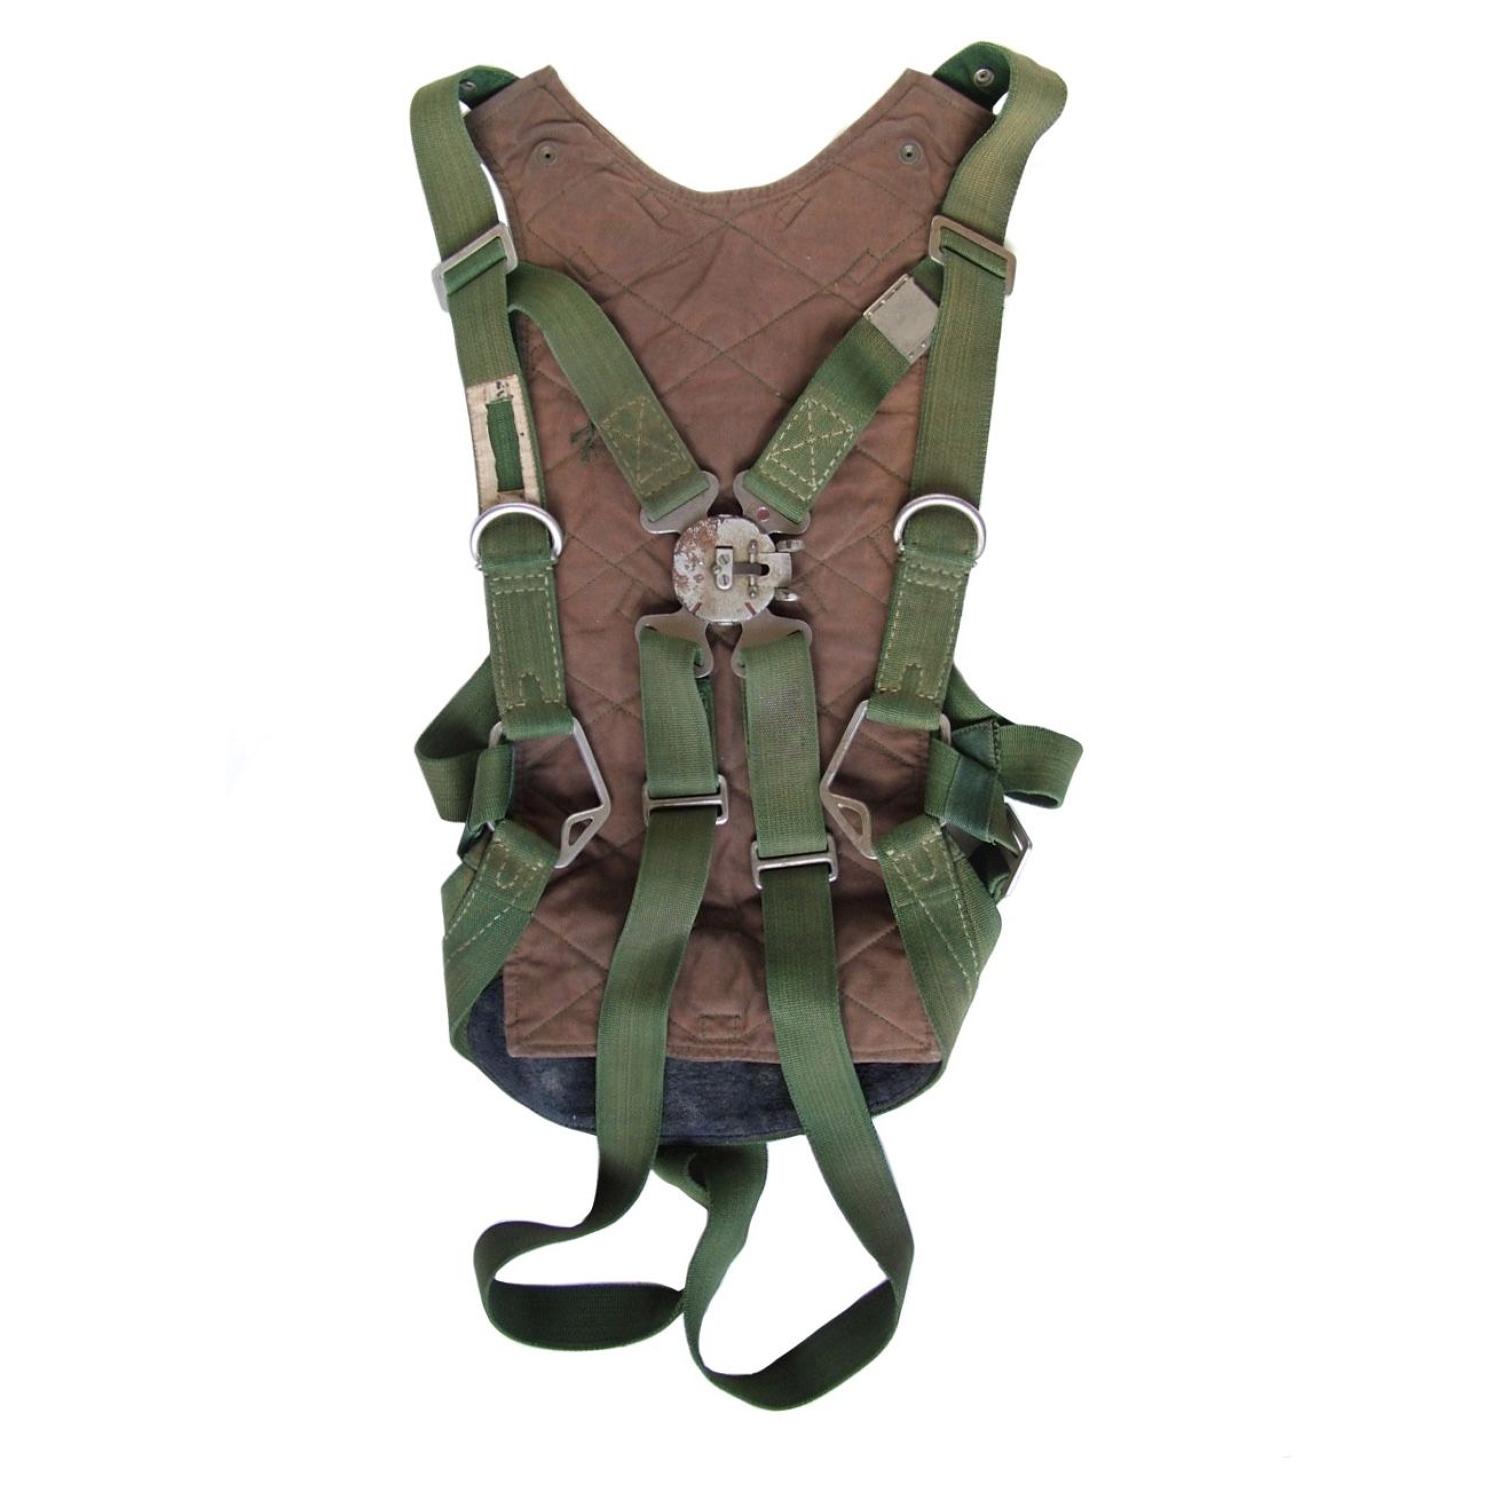 Imperial Japanese Naval parachute harness